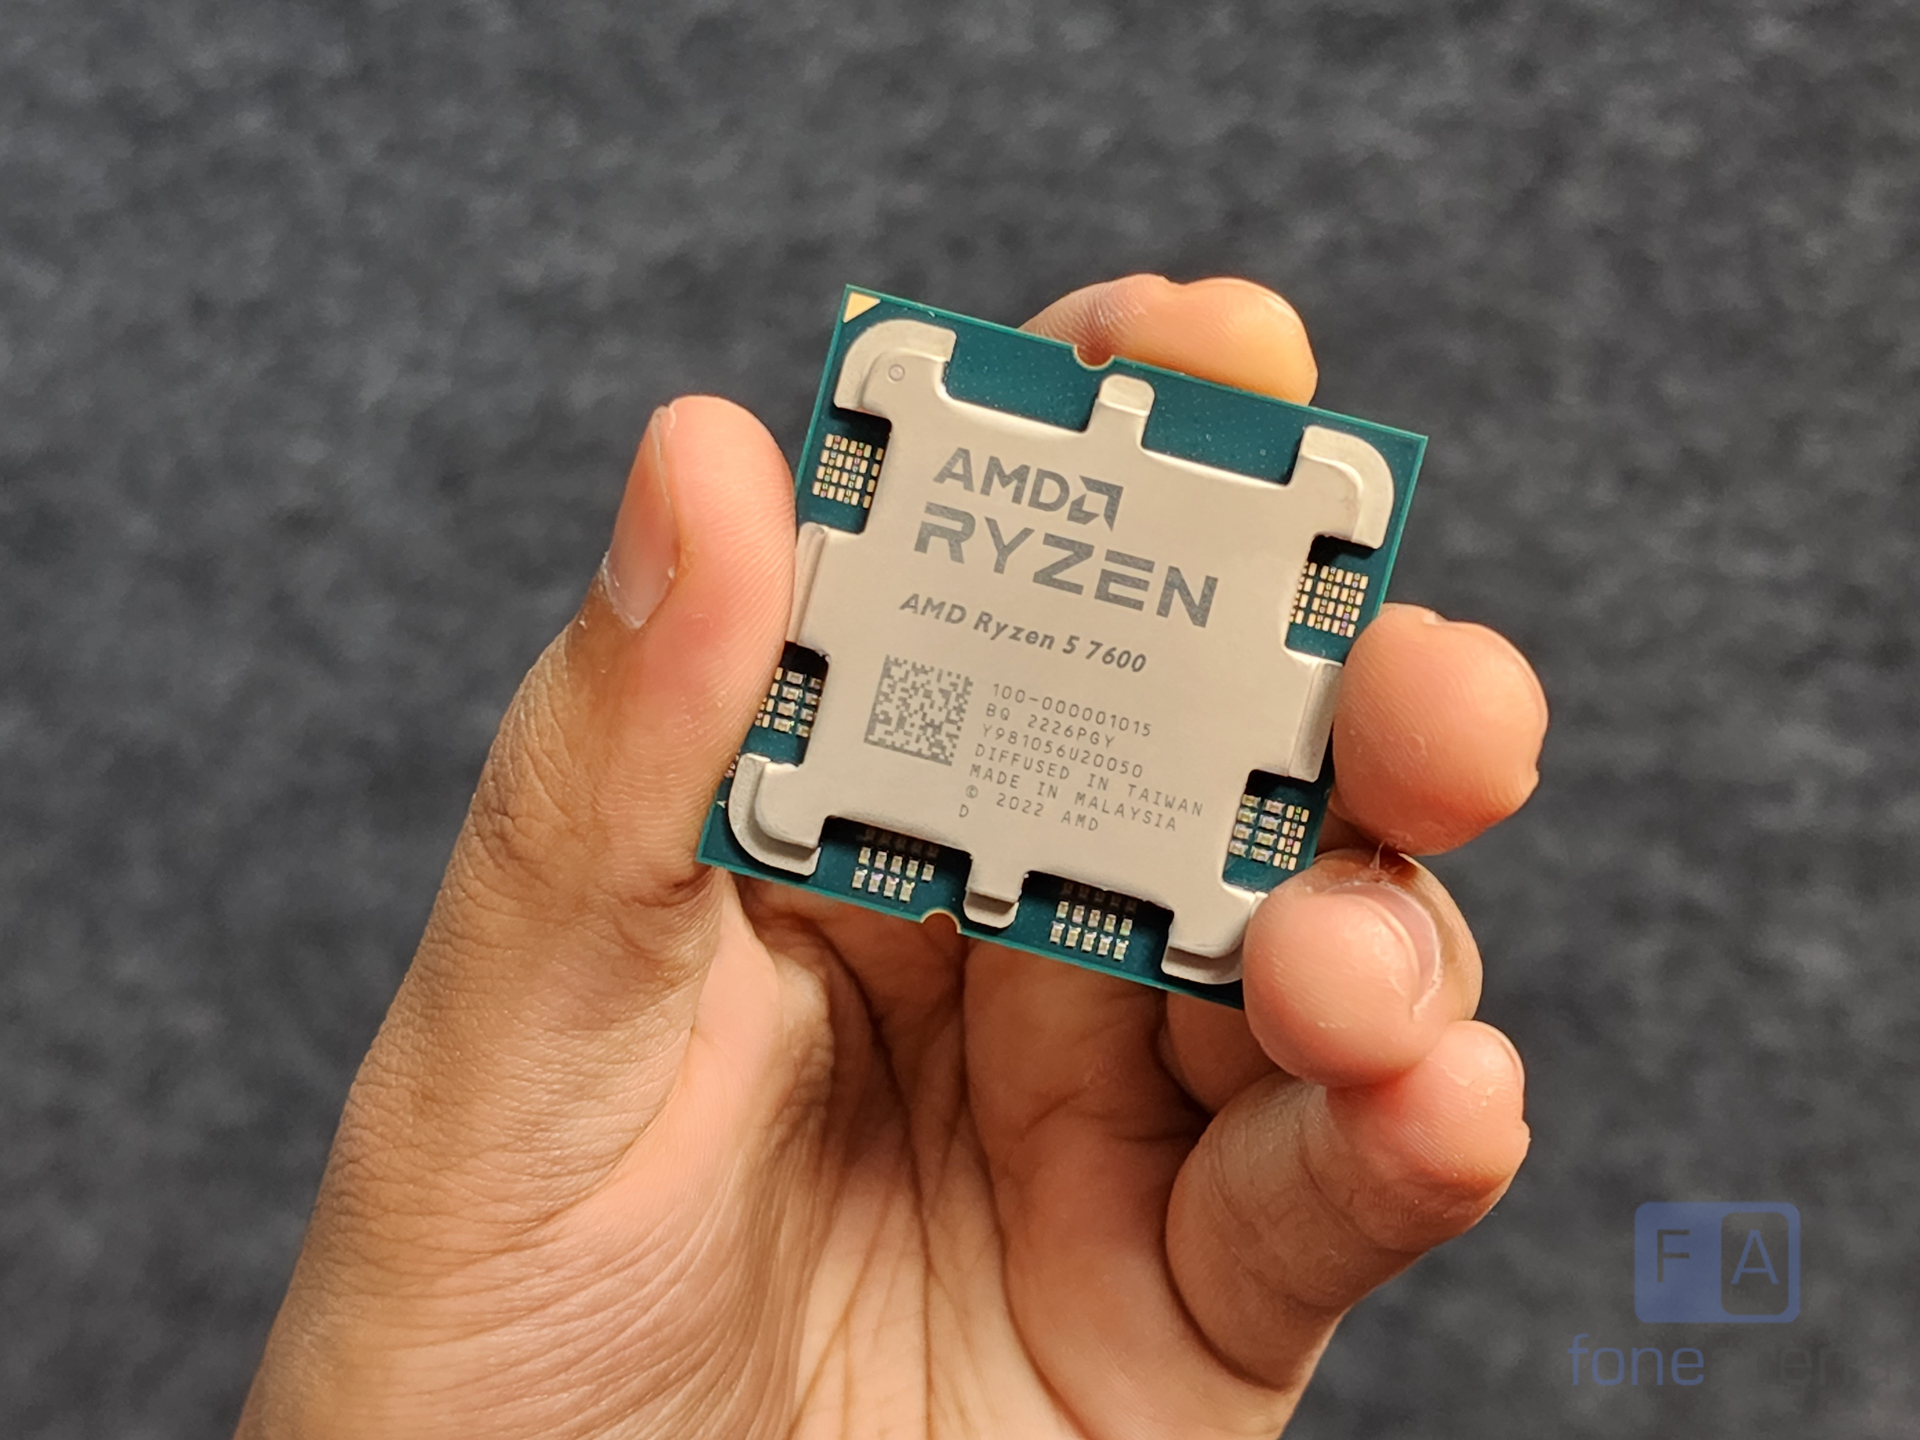 AMD Ryzen 5 7600 Review: Fantastic value for gaming PCs